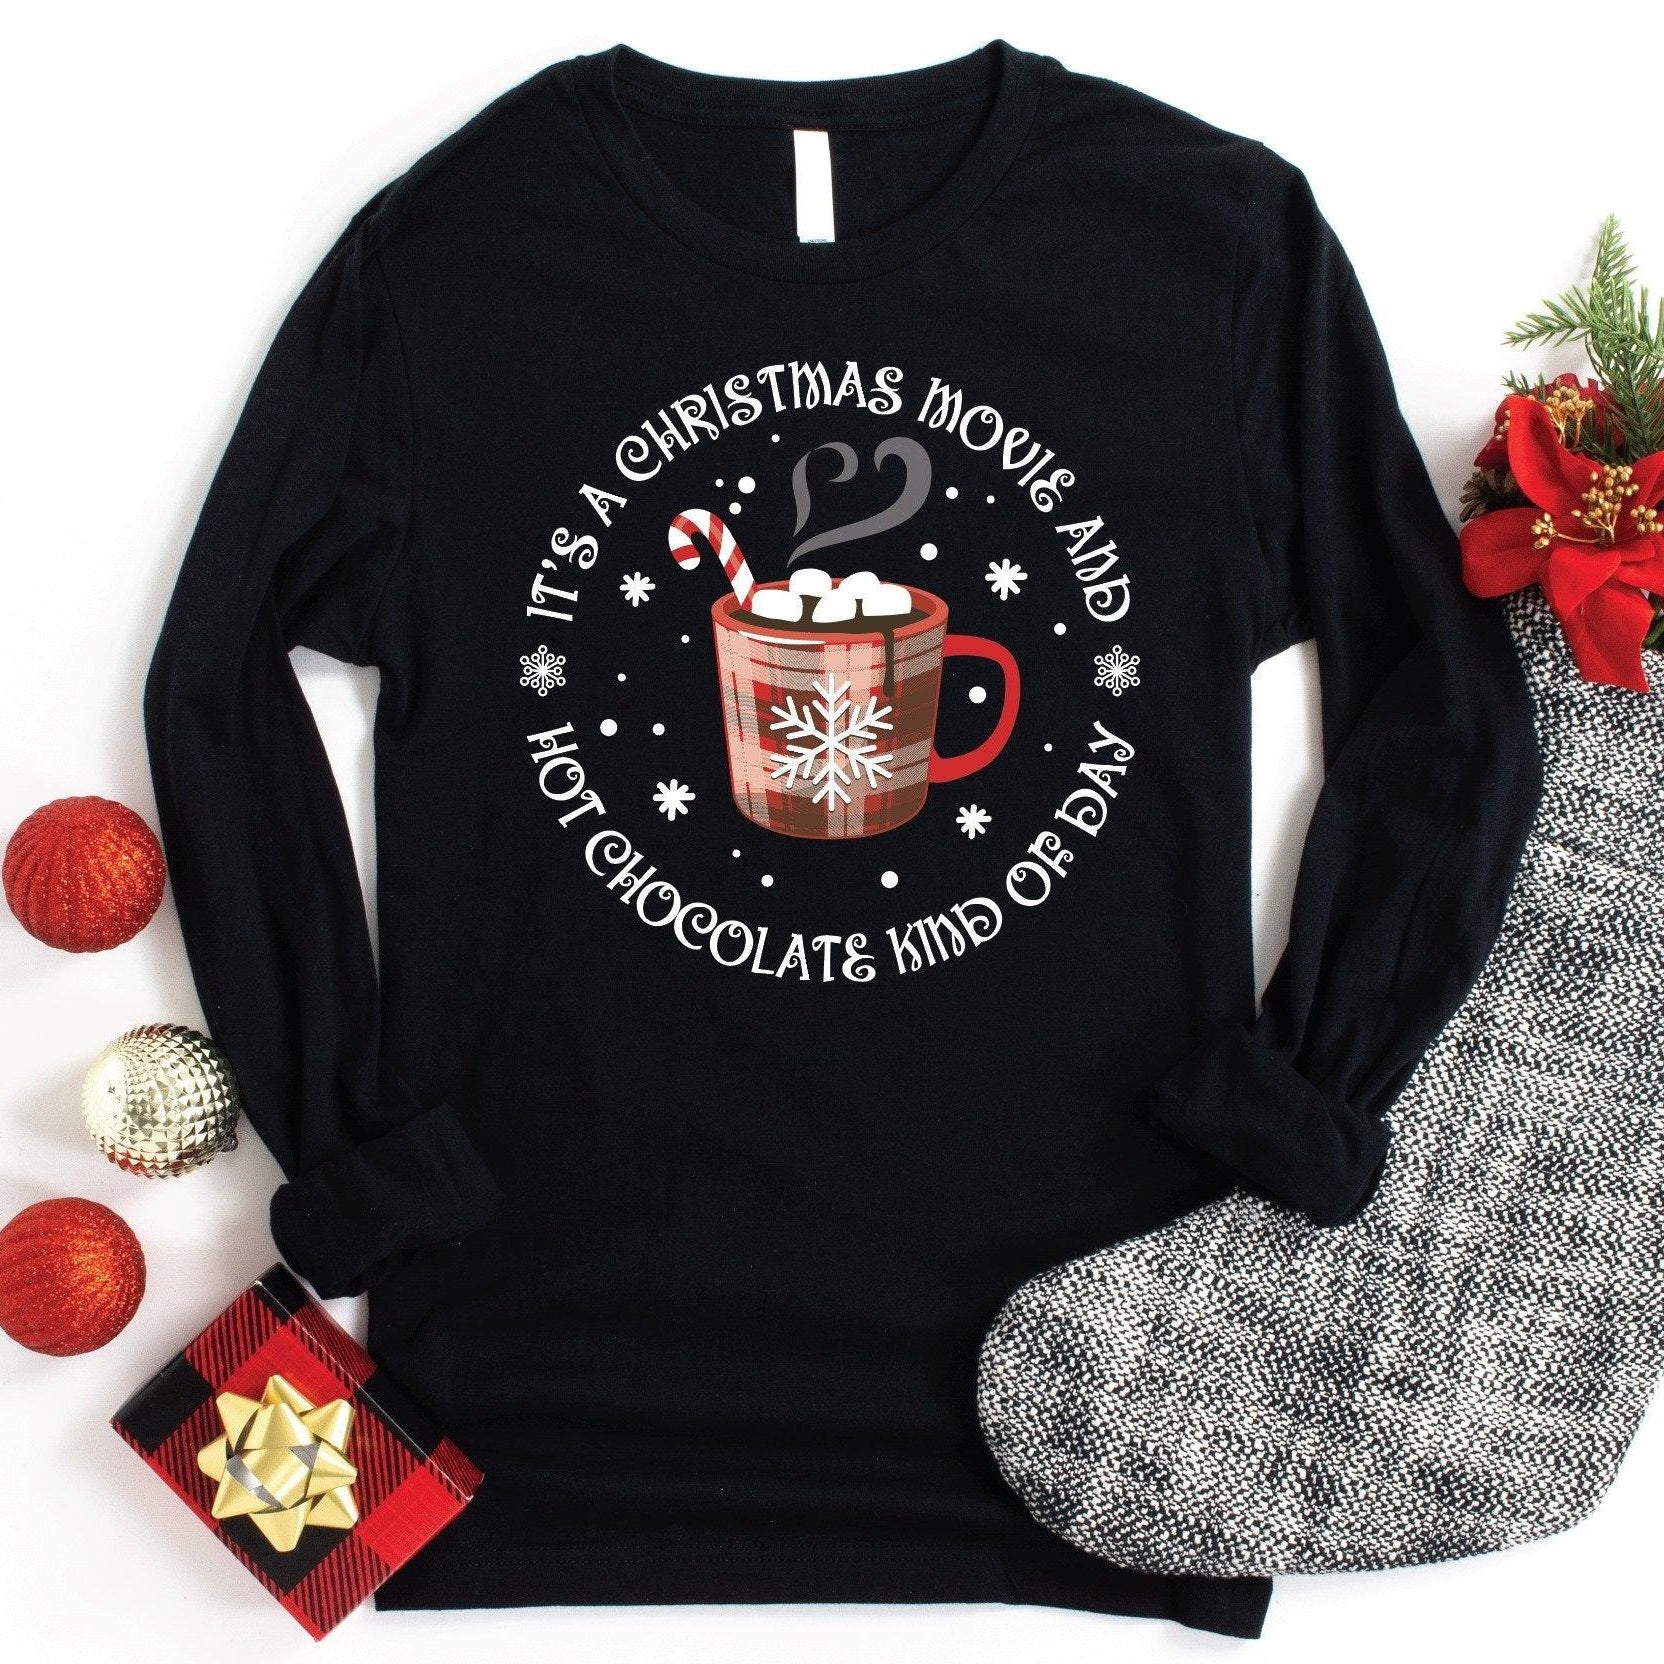 It's a Christmas Movie and Hot Chocolate Kind of Day - Signastyle Boutique